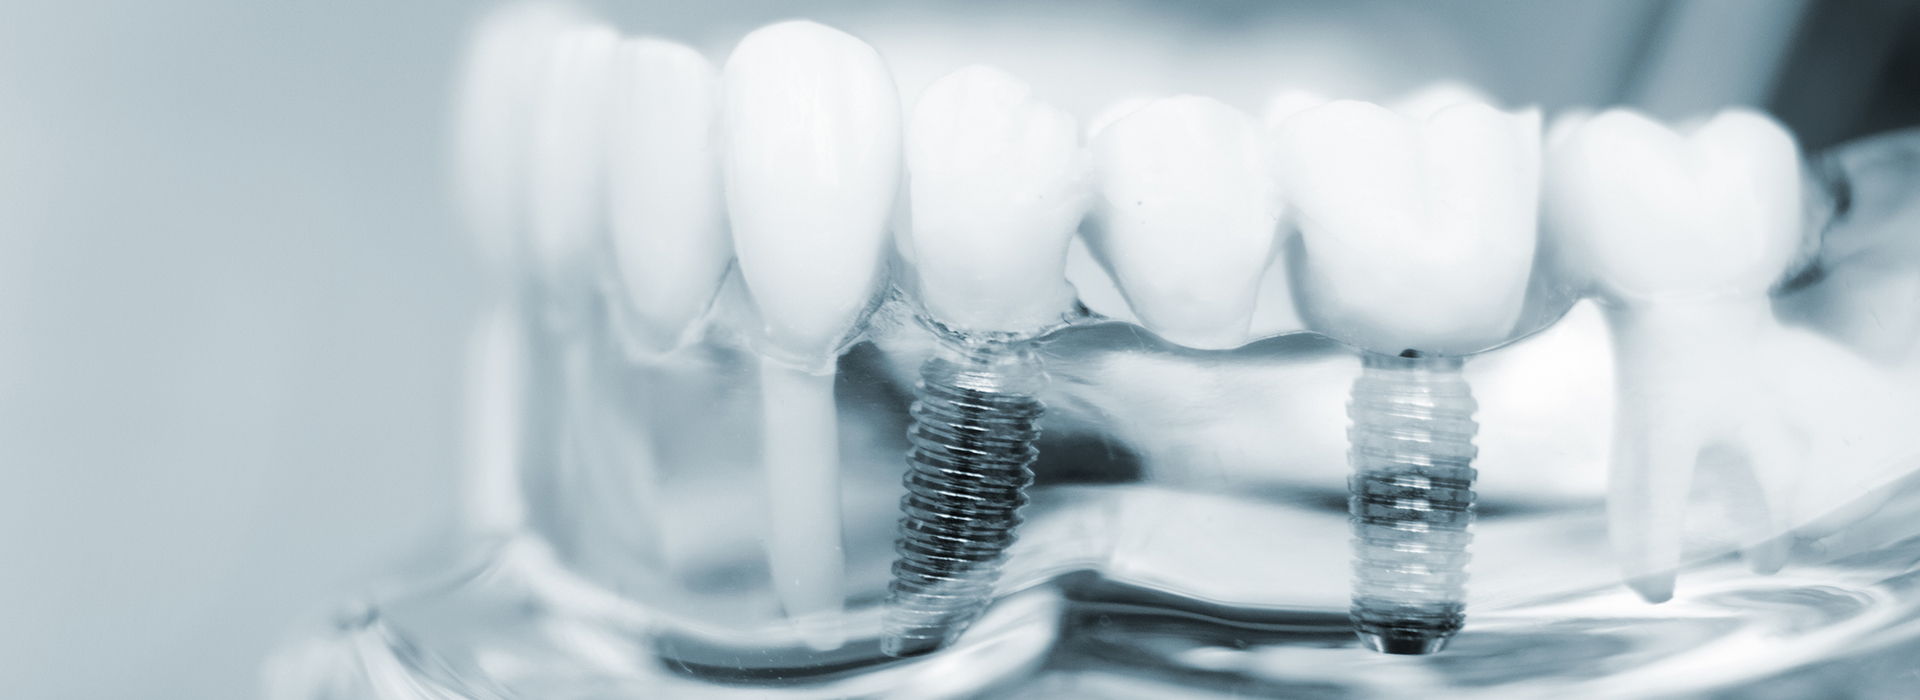 Associates in Dentistry | Implant Restorations, Aesthetic Tooth Colored Fillings and Root Canals